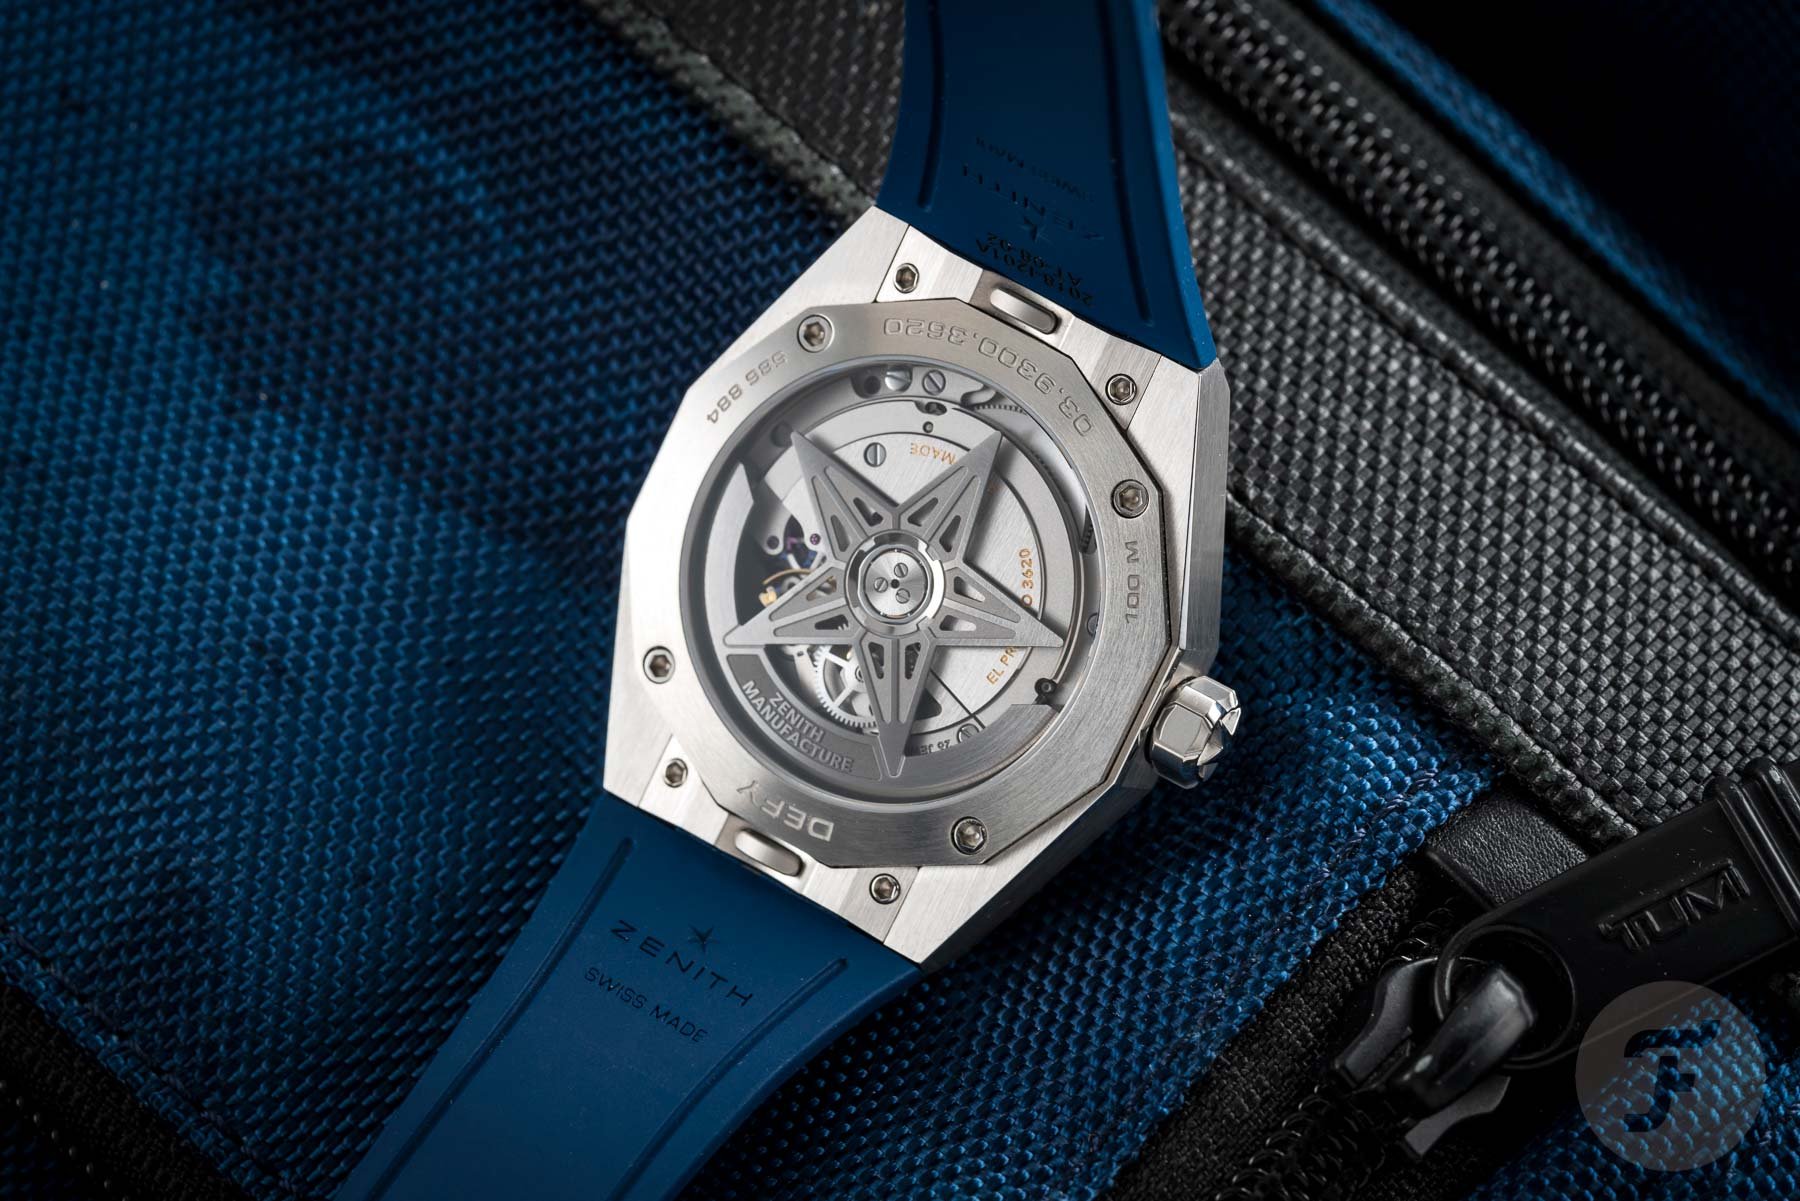 Zenith Defy Skyline: How To Kill Two Birds With One Watch - Quill & Pad